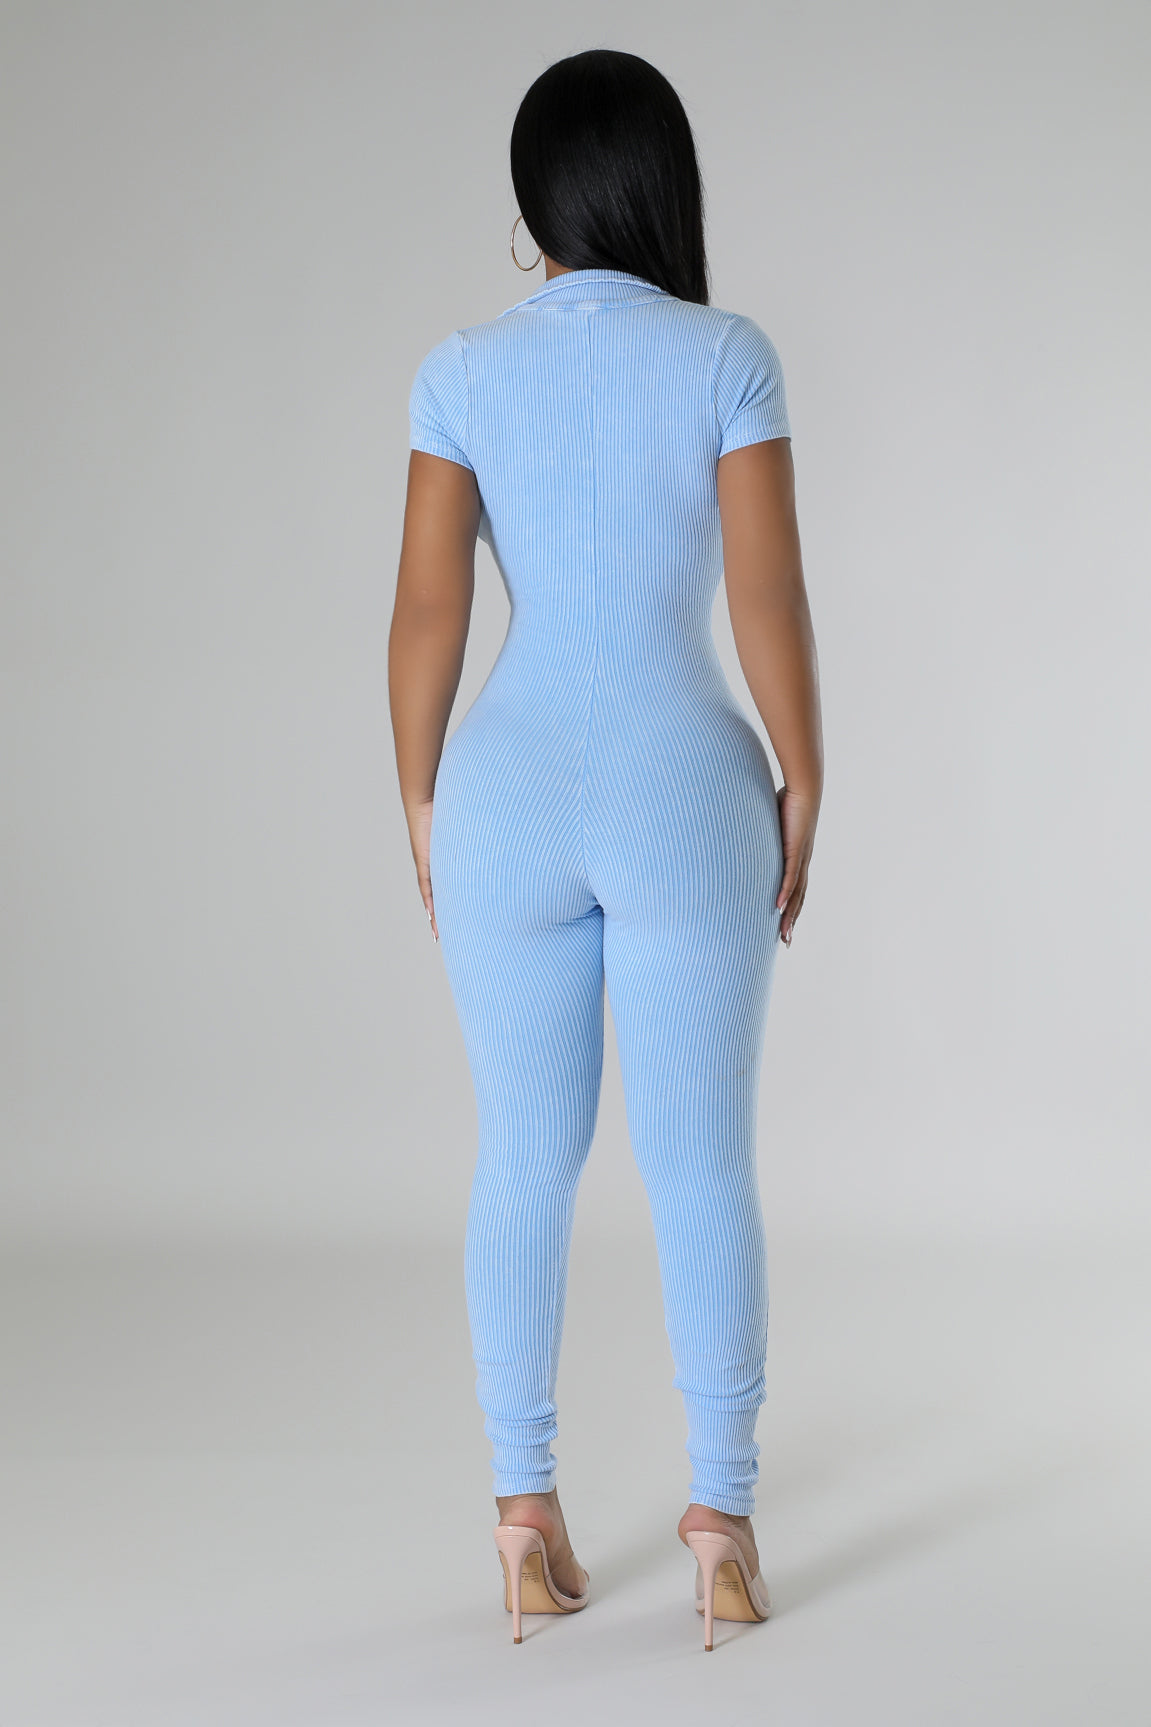 Body Moves Jumpsuit